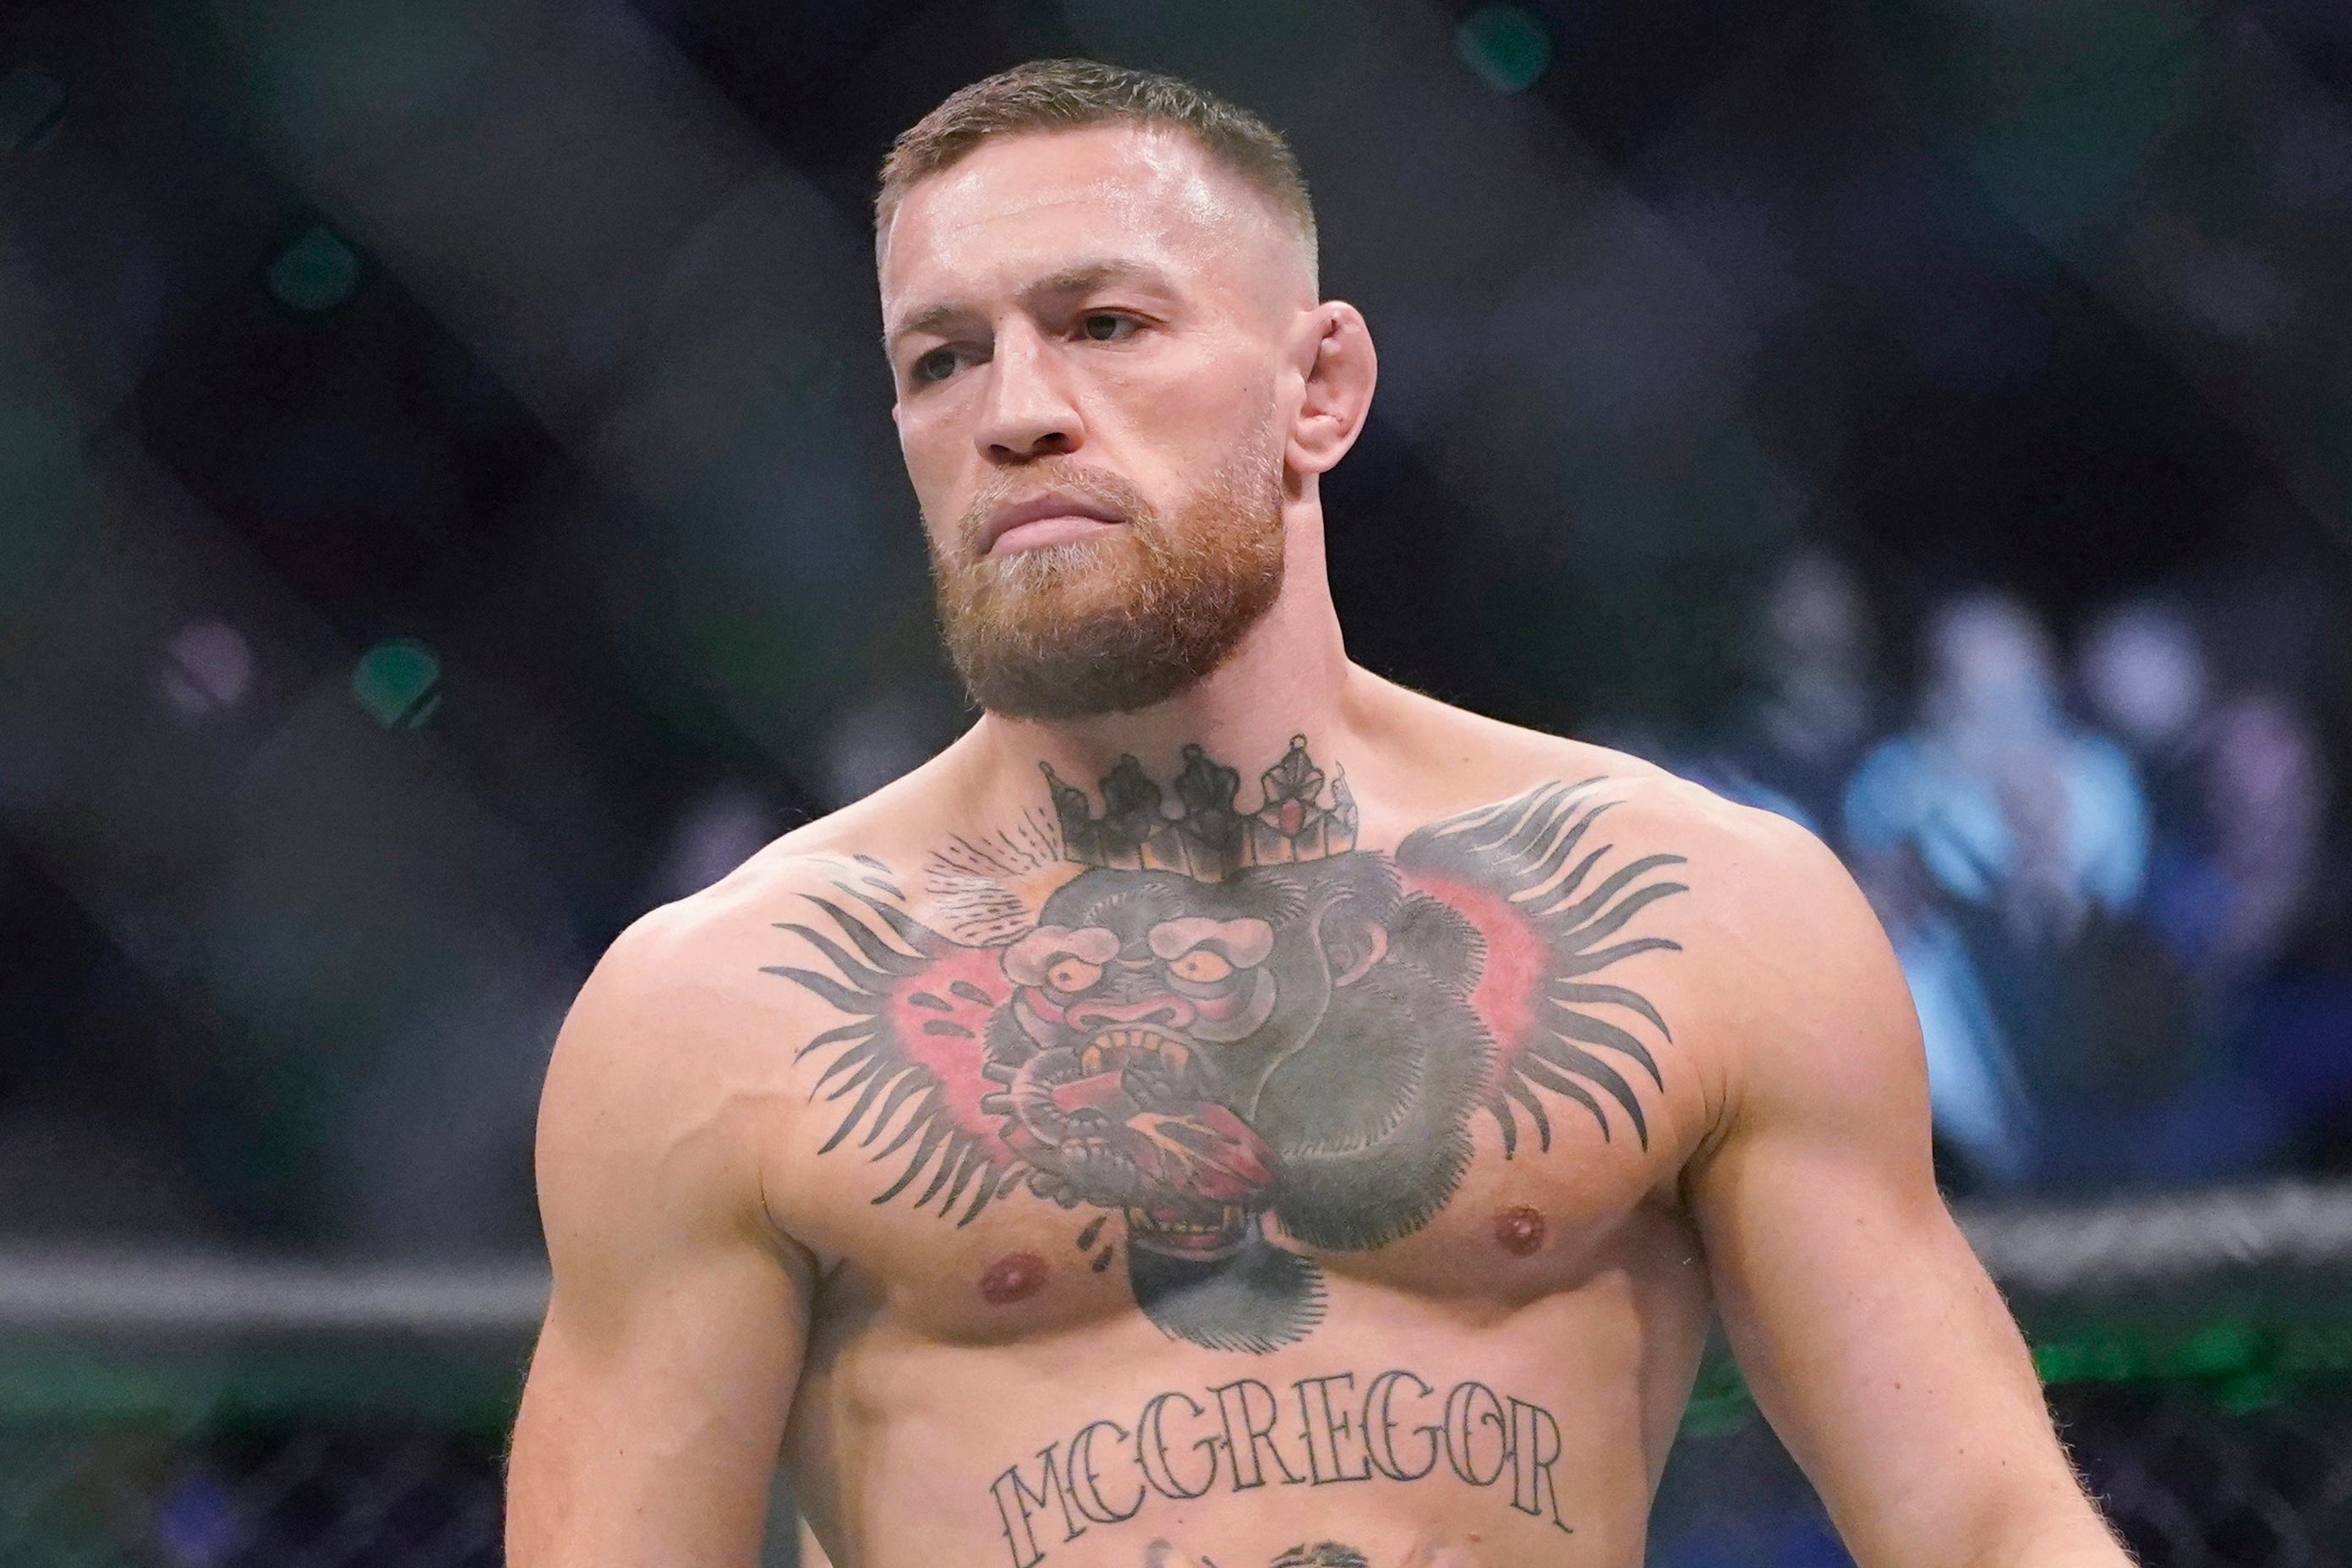 McGregor’s UFC return is up in the air at the moment